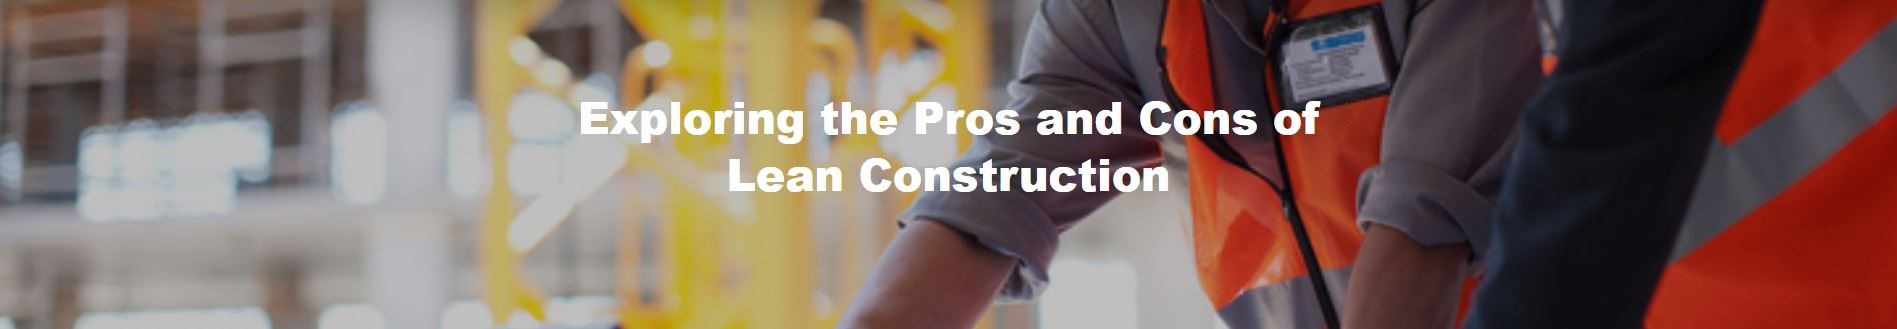 Exploring the Pros and Cons of Lean Construction